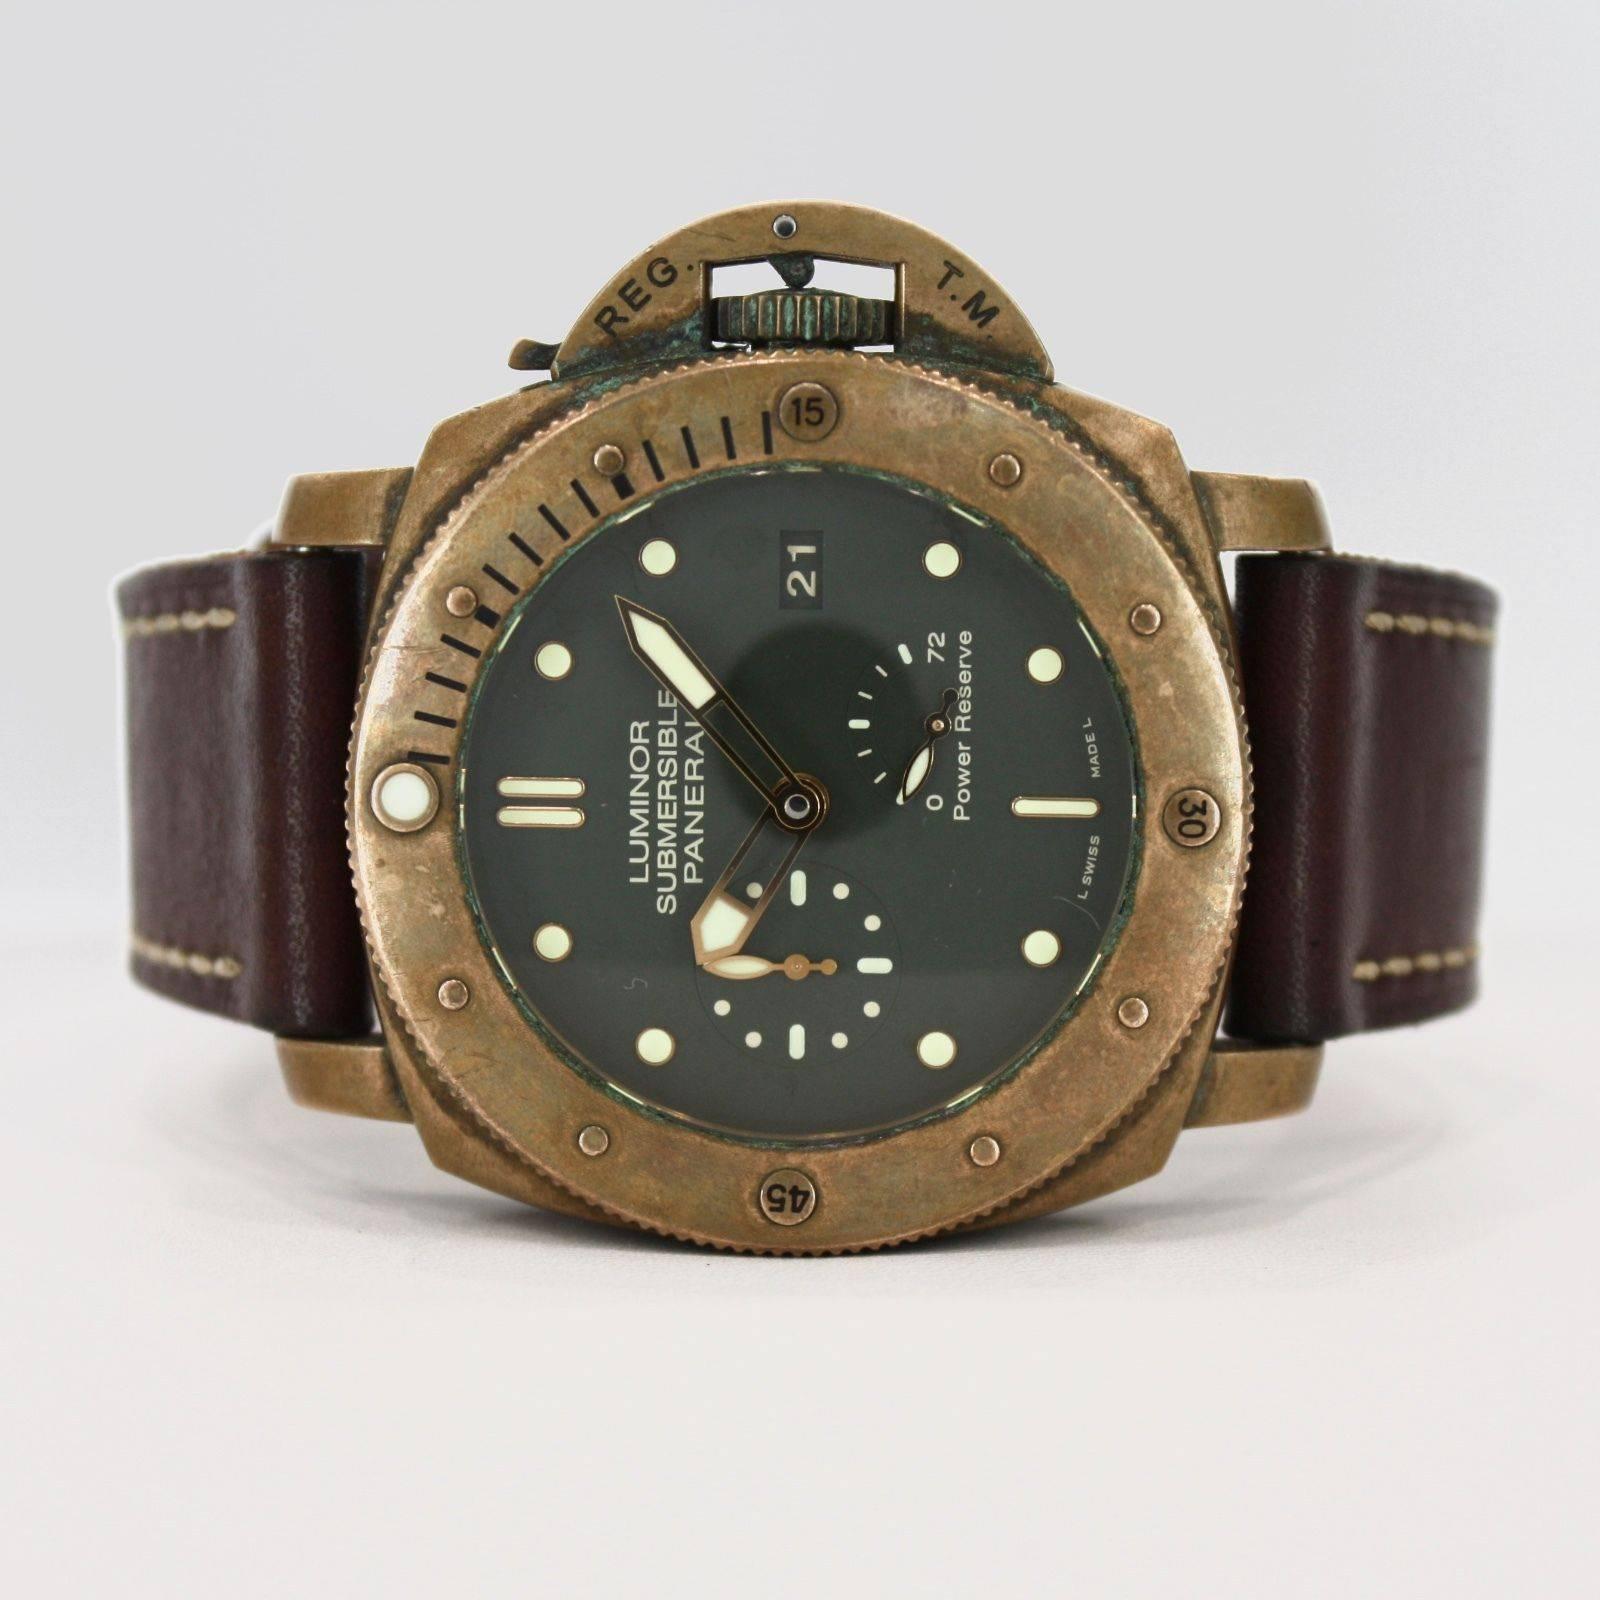 Brand Name: Panerai 
Style Number: PAM00507
Also Called: PAM 507, Bronzo
Series: Luminor Submersible 1950 3 Days Power Reserve
Gender: Men's
Case Material: Bronze
Dial Color: Green
Movement: Automatic
Engine: P.0002 - executed entirely by